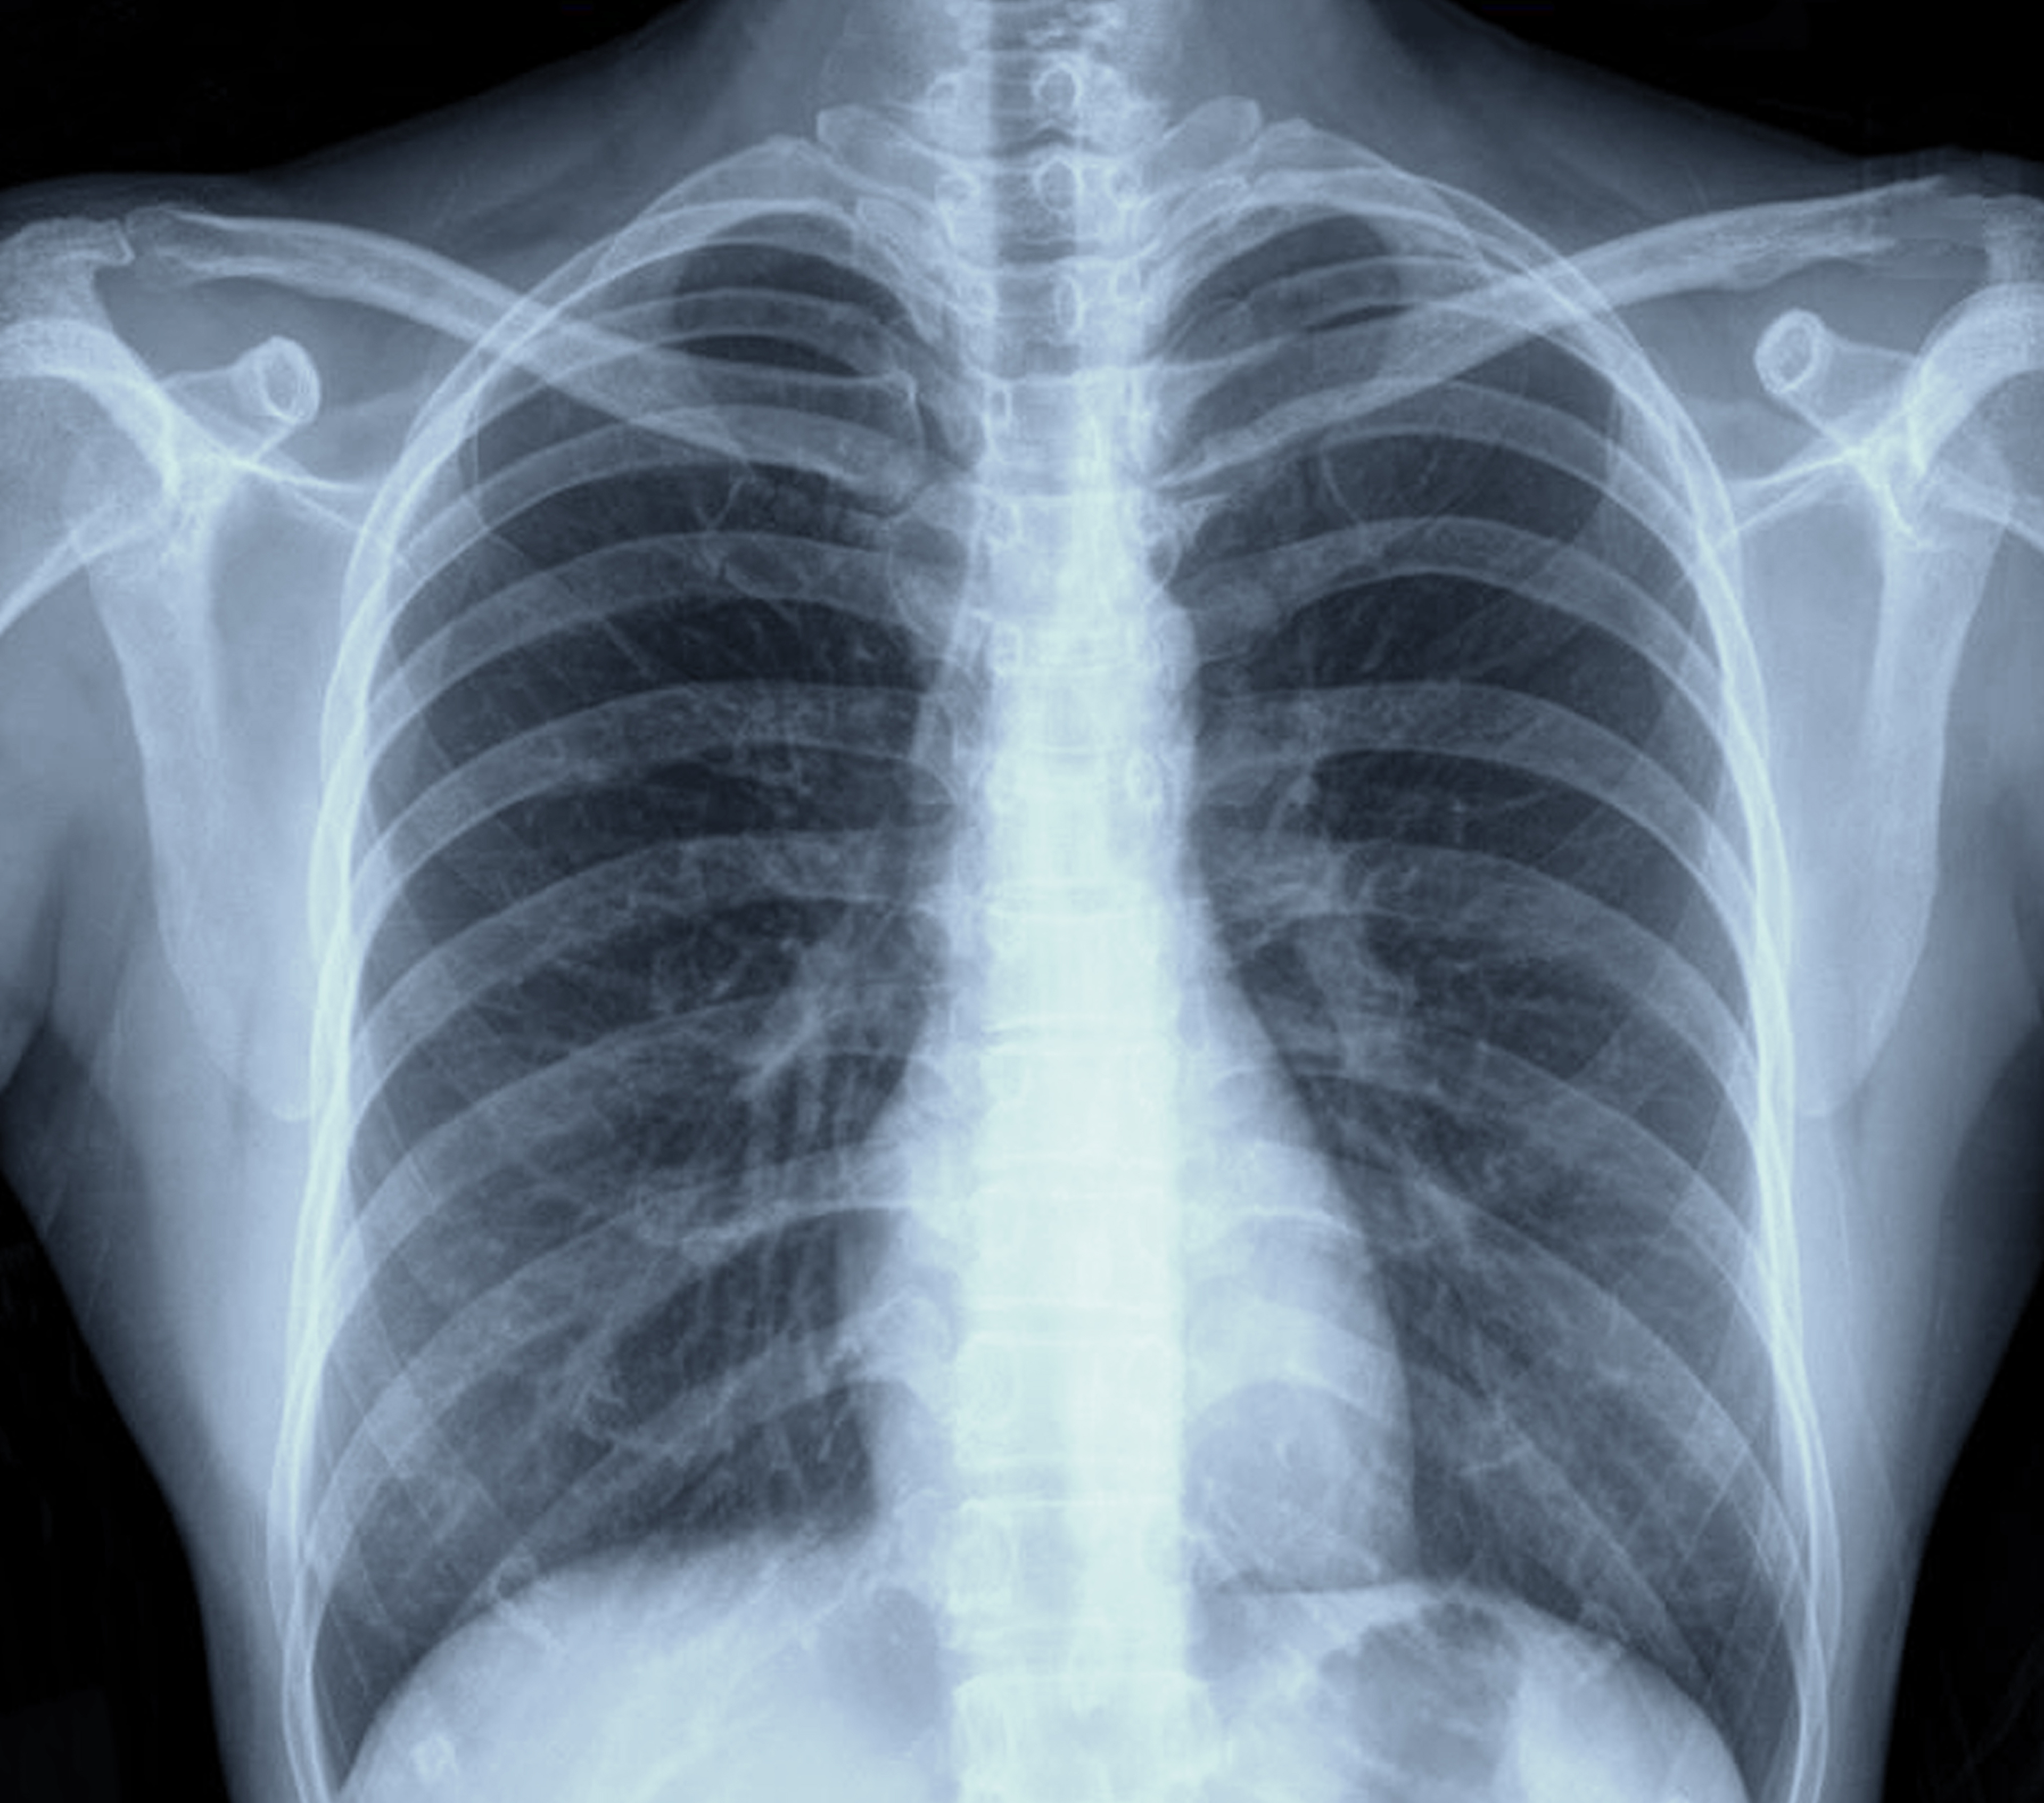 Can Deep Learning Assessment of X-Rays Improve Triage of Patients with Acute Chest Pain?